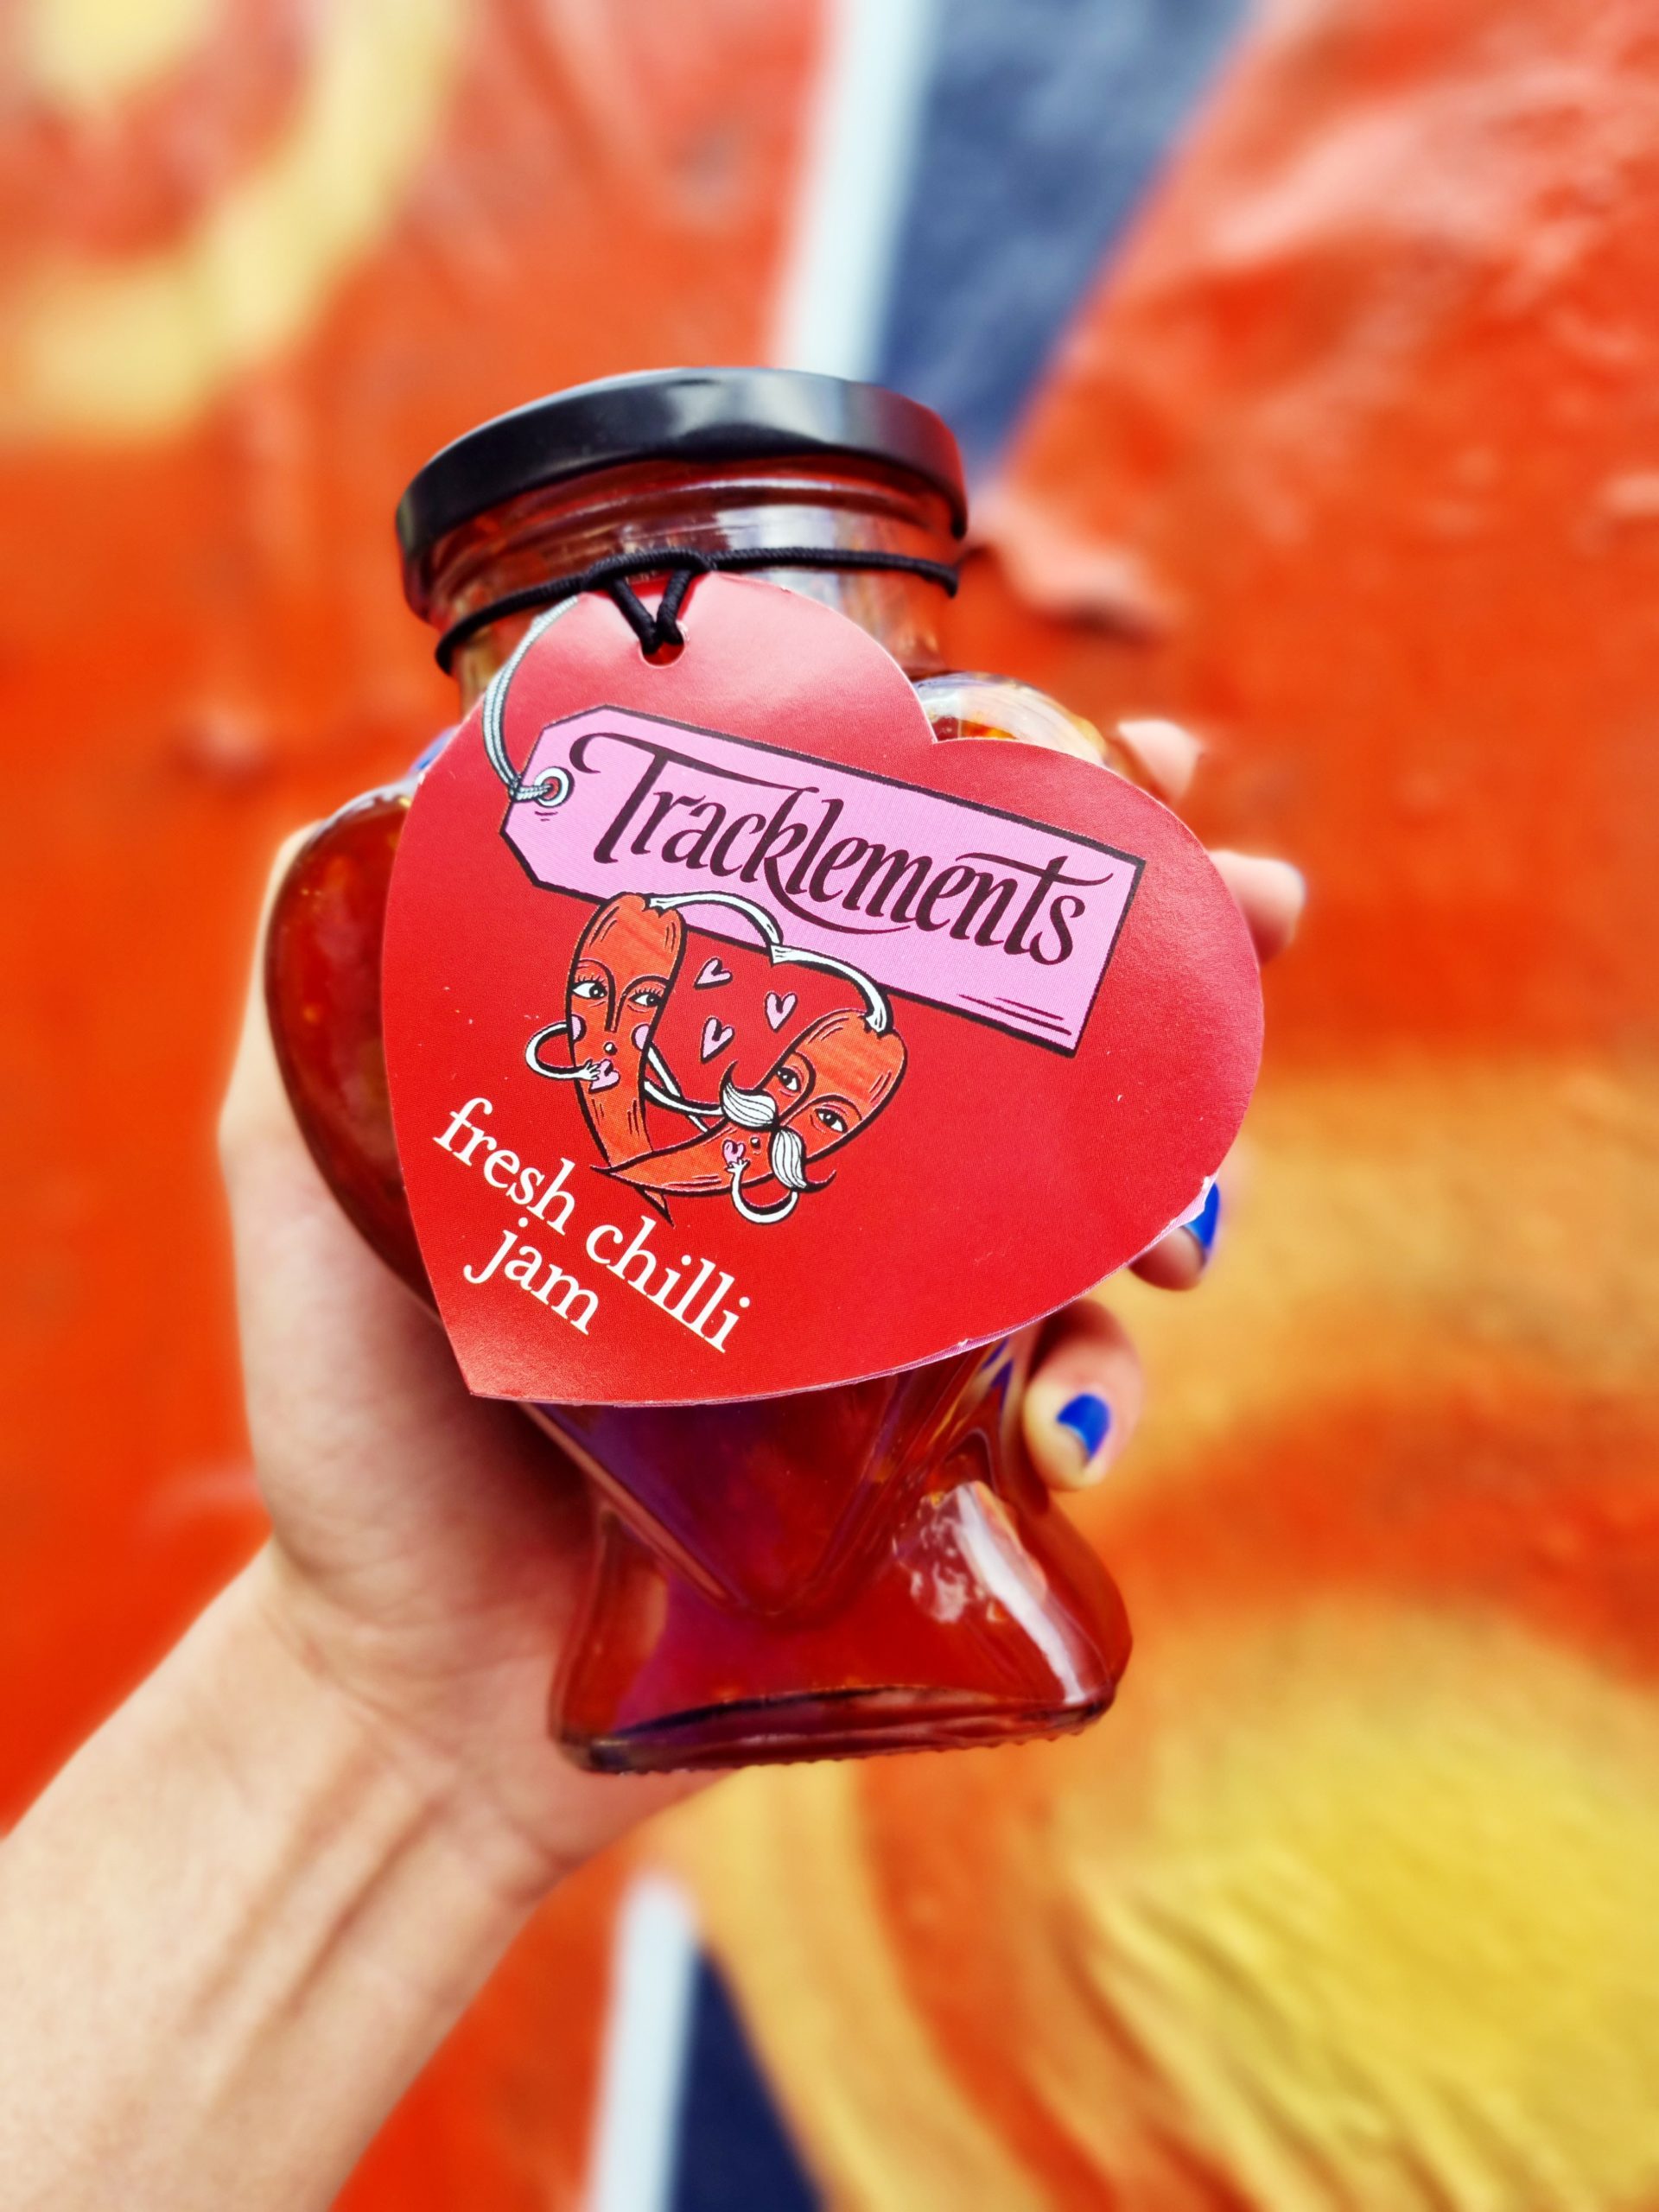 <img src="tracklements.jpg" alt="tracklements chilli jam quirky Valentine's day"/> 